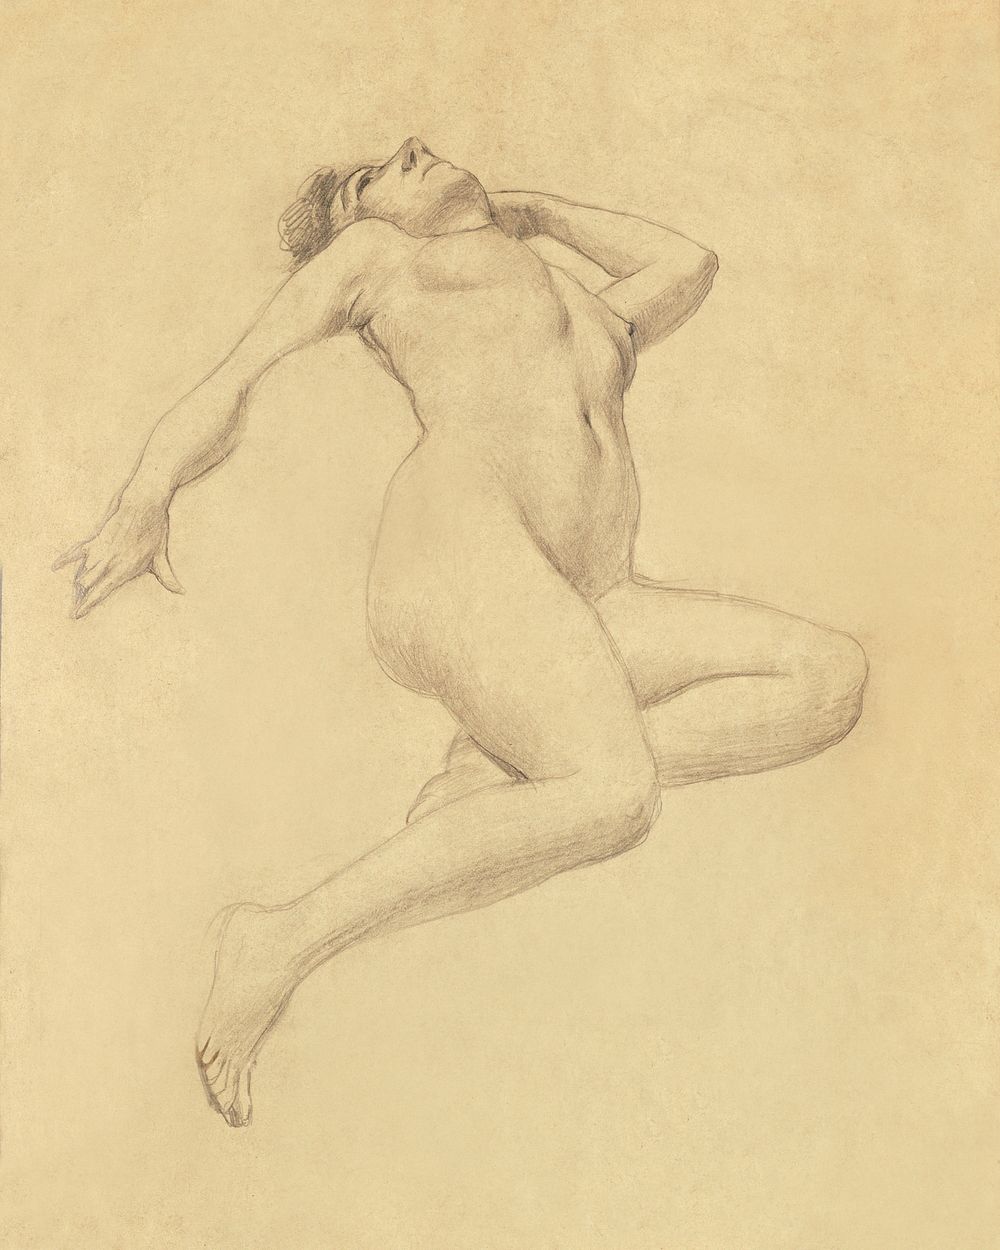 Vintage erotic nude art of a naked woman. Study of Reclining Nude Figure (1900) by Louis Schaettle. Original from The…